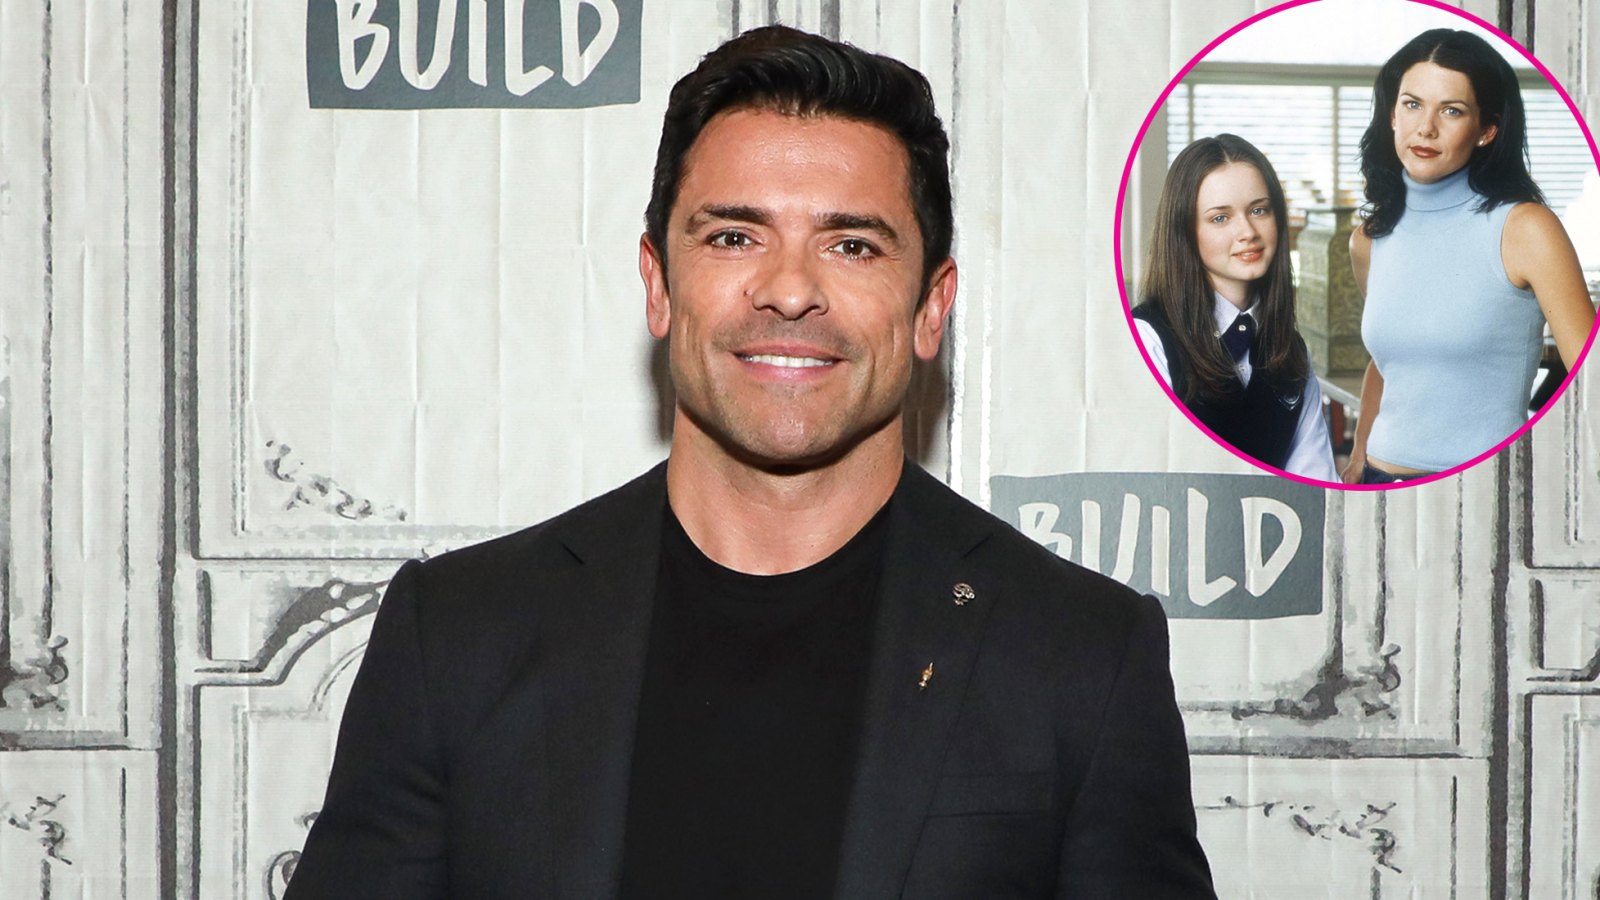 Mark Consuelos Is Obsessed With 'Gilmore Girls,' Started Group Chat With Nieces to Discuss Show